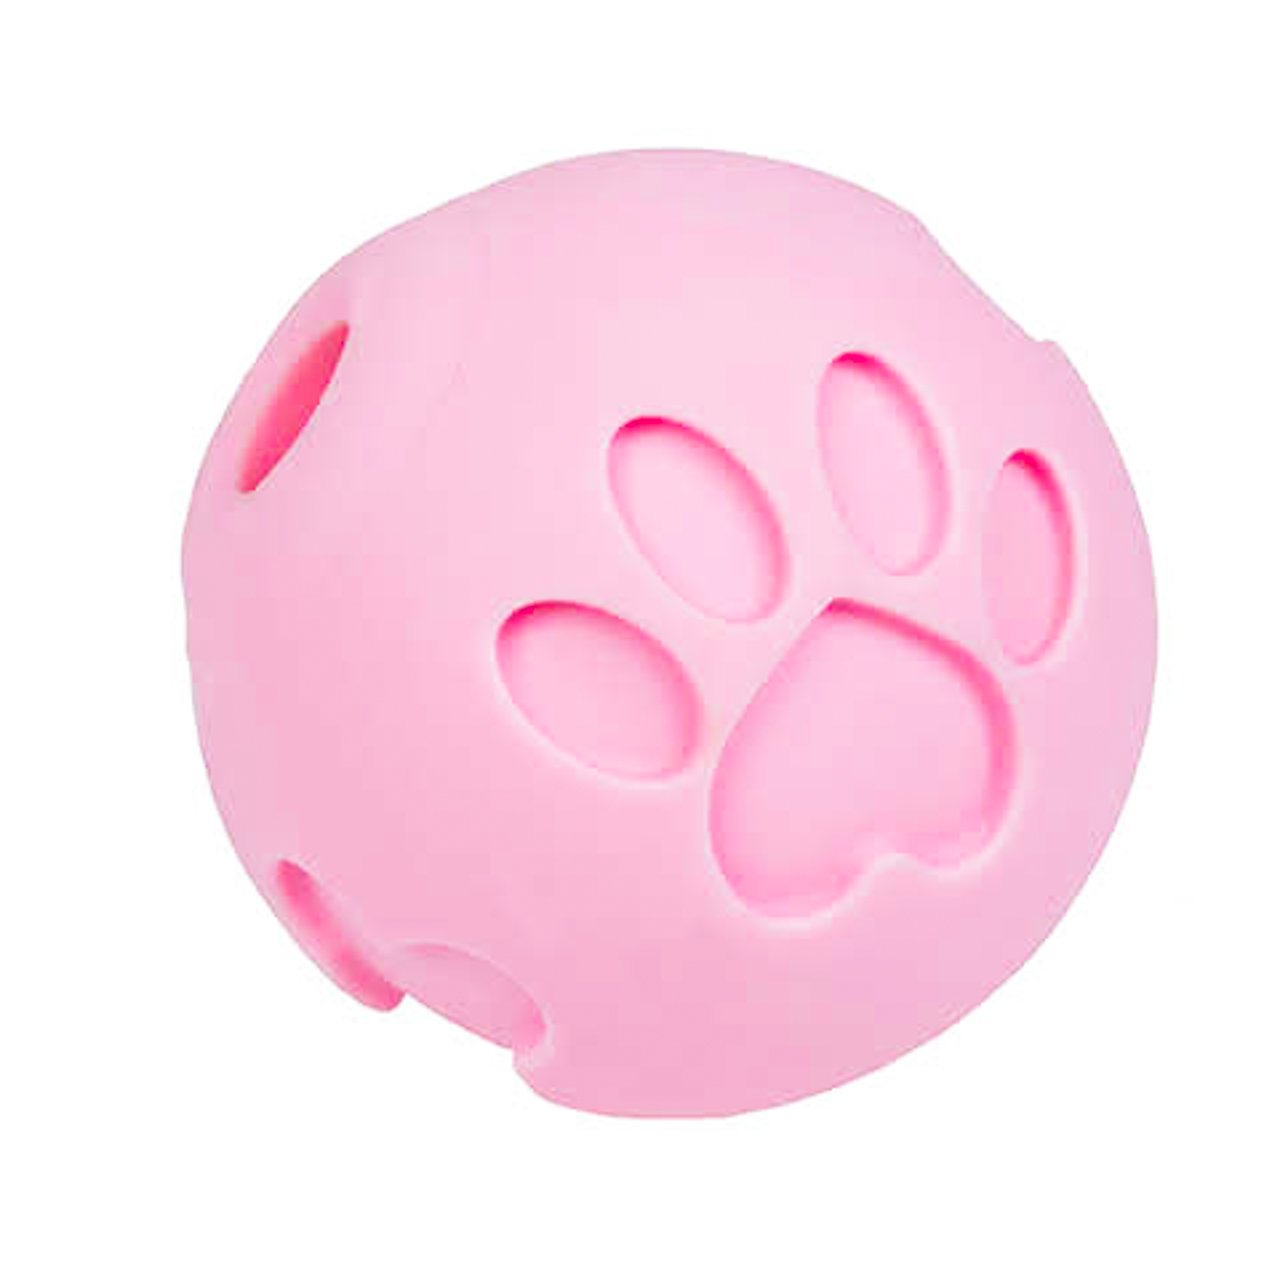 Petique Paw Me! Treat Ball Dispenser for Dogs and Other Animals